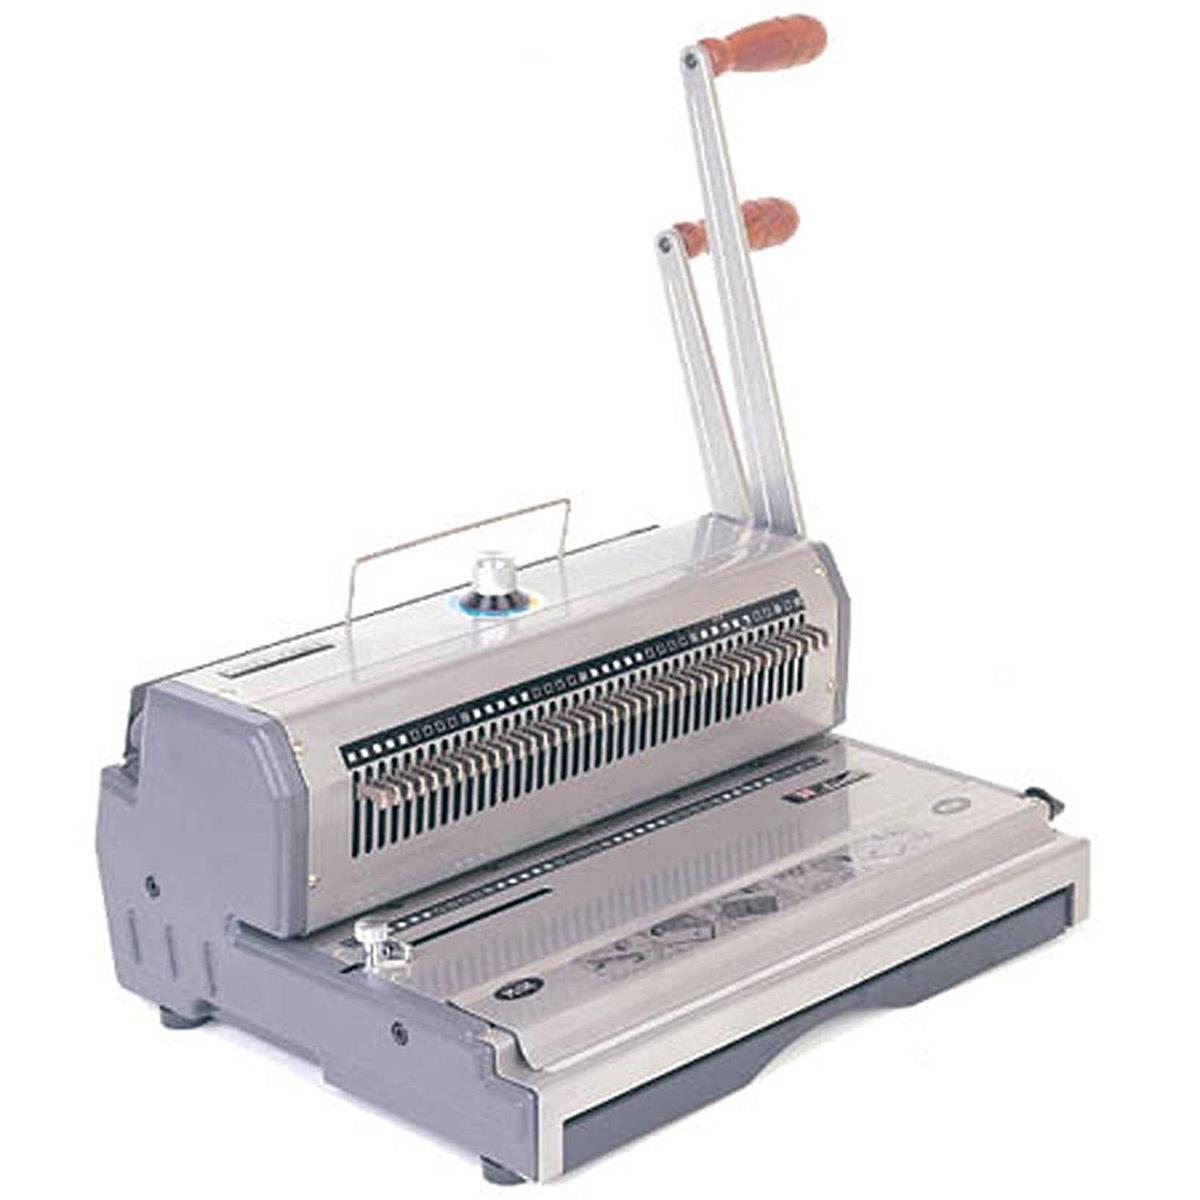 

Akiles WireMac-31 14" 3:1 Pitch Heavy-Duty Wire Punch and Binding Machine